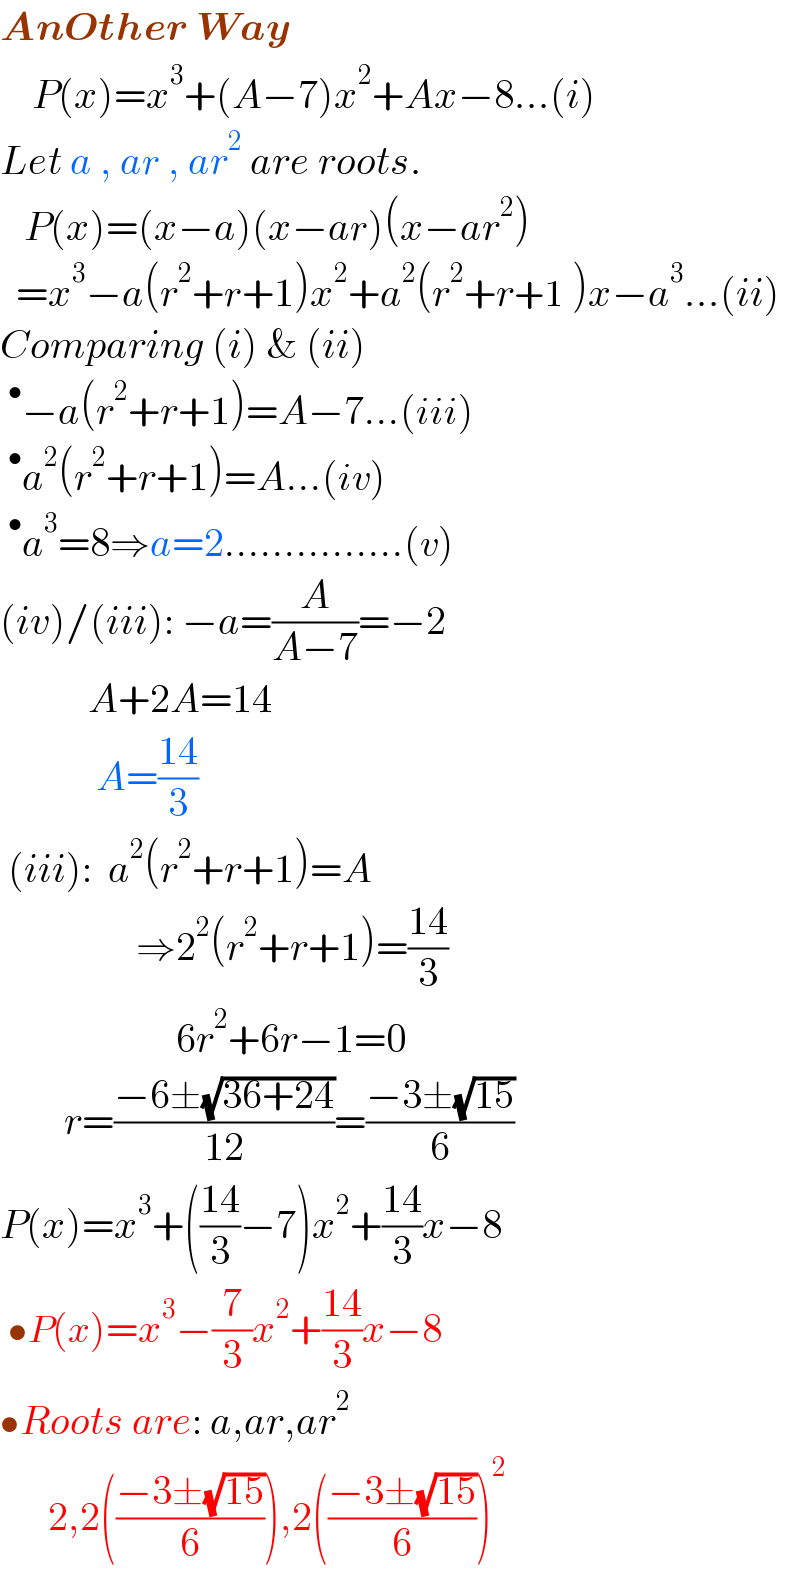 AnOther Way      P(x)=x^3 +(A−7)x^2 +Ax−8...(i)  Let a , ar , ar^2  are roots.     P(x)=(x−a)(x−ar)(x−ar^2 )    =x^3 −a(r^2 +r+1)x^2 +a^2 (r^2 +r+1 )x−a^3 ...(ii)  Comparing (i) & (ii)  ^• −a(r^2 +r+1)=A−7...(iii)  ^• a^2 (r^2 +r+1)=A...(iv)  ^• a^3 =8⇒a=2...............(v)  (iv)/(iii): −a=(A/(A−7))=−2             A+2A=14              A=((14)/3)   (iii):  a^2 (r^2 +r+1)=A                   ⇒2^2 (r^2 +r+1)=((14)/3)                        6r^2 +6r−1=0          r=((−6±(√(36+24)))/(12))=((−3±(√(15)))/6)  P(x)=x^3 +(((14)/3)−7)x^2 +((14)/3)x−8   •P(x)=x^3 −(7/3)x^2 +((14)/3)x−8  •Roots are: a,ar,ar^2         2,2(((−3±(√(15)))/6)),2(((−3±(√(15)))/6))^2   